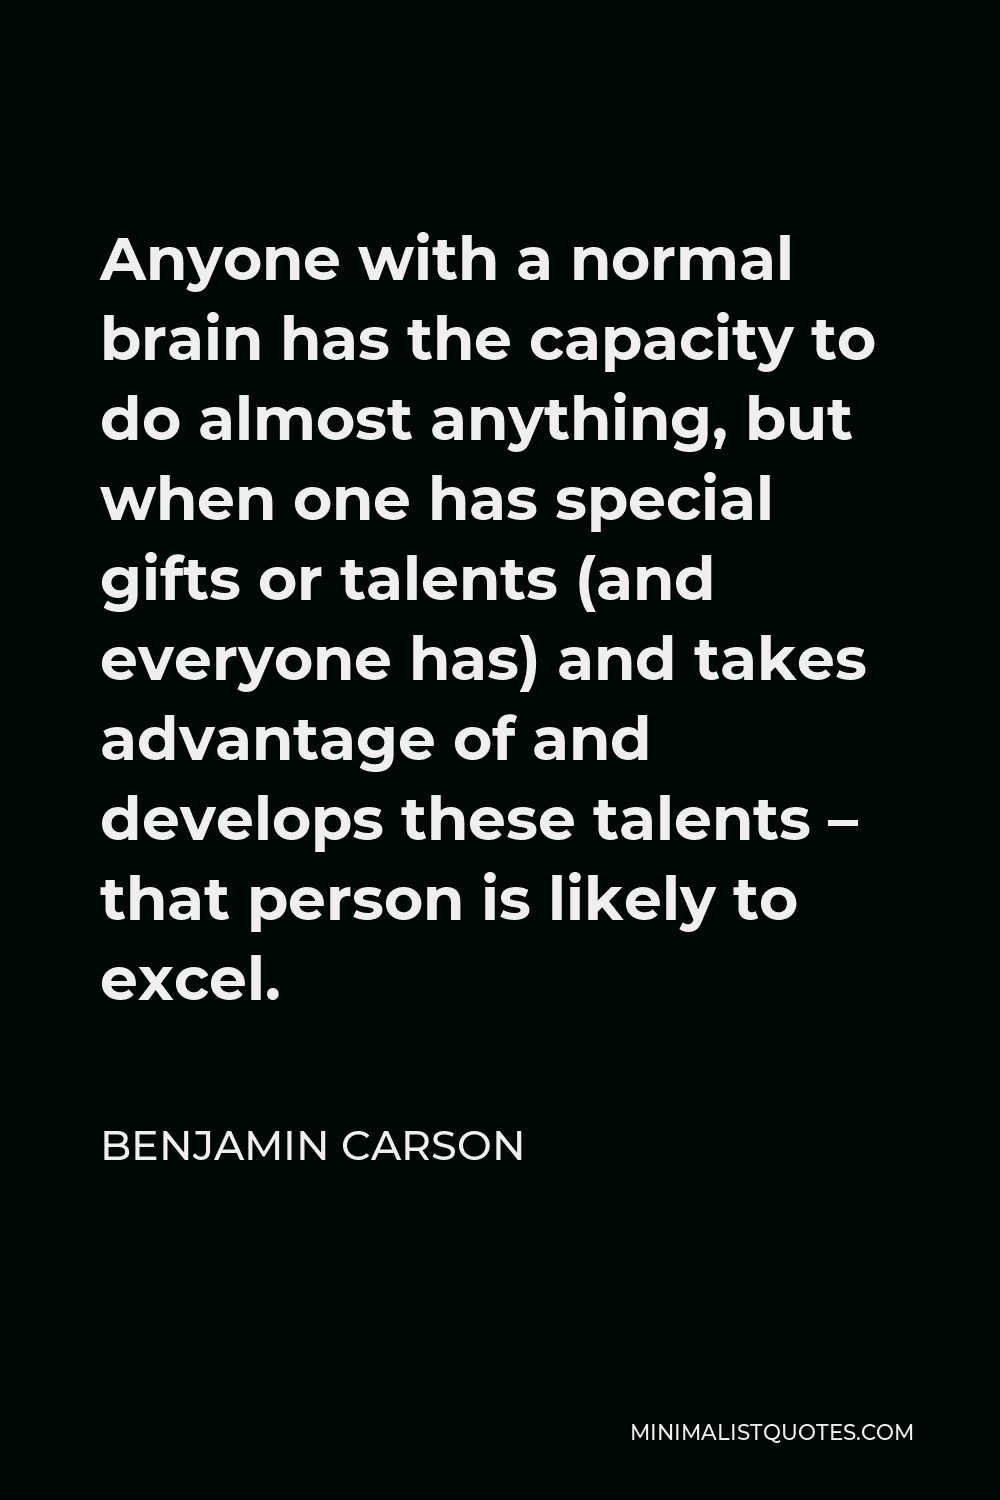 Benjamin Carson Quote - Anyone with a normal brain has the capacity to do almost anything, but when one has special gifts or talents (and everyone has) and takes advantage of and develops these talents – that person is likely to excel.